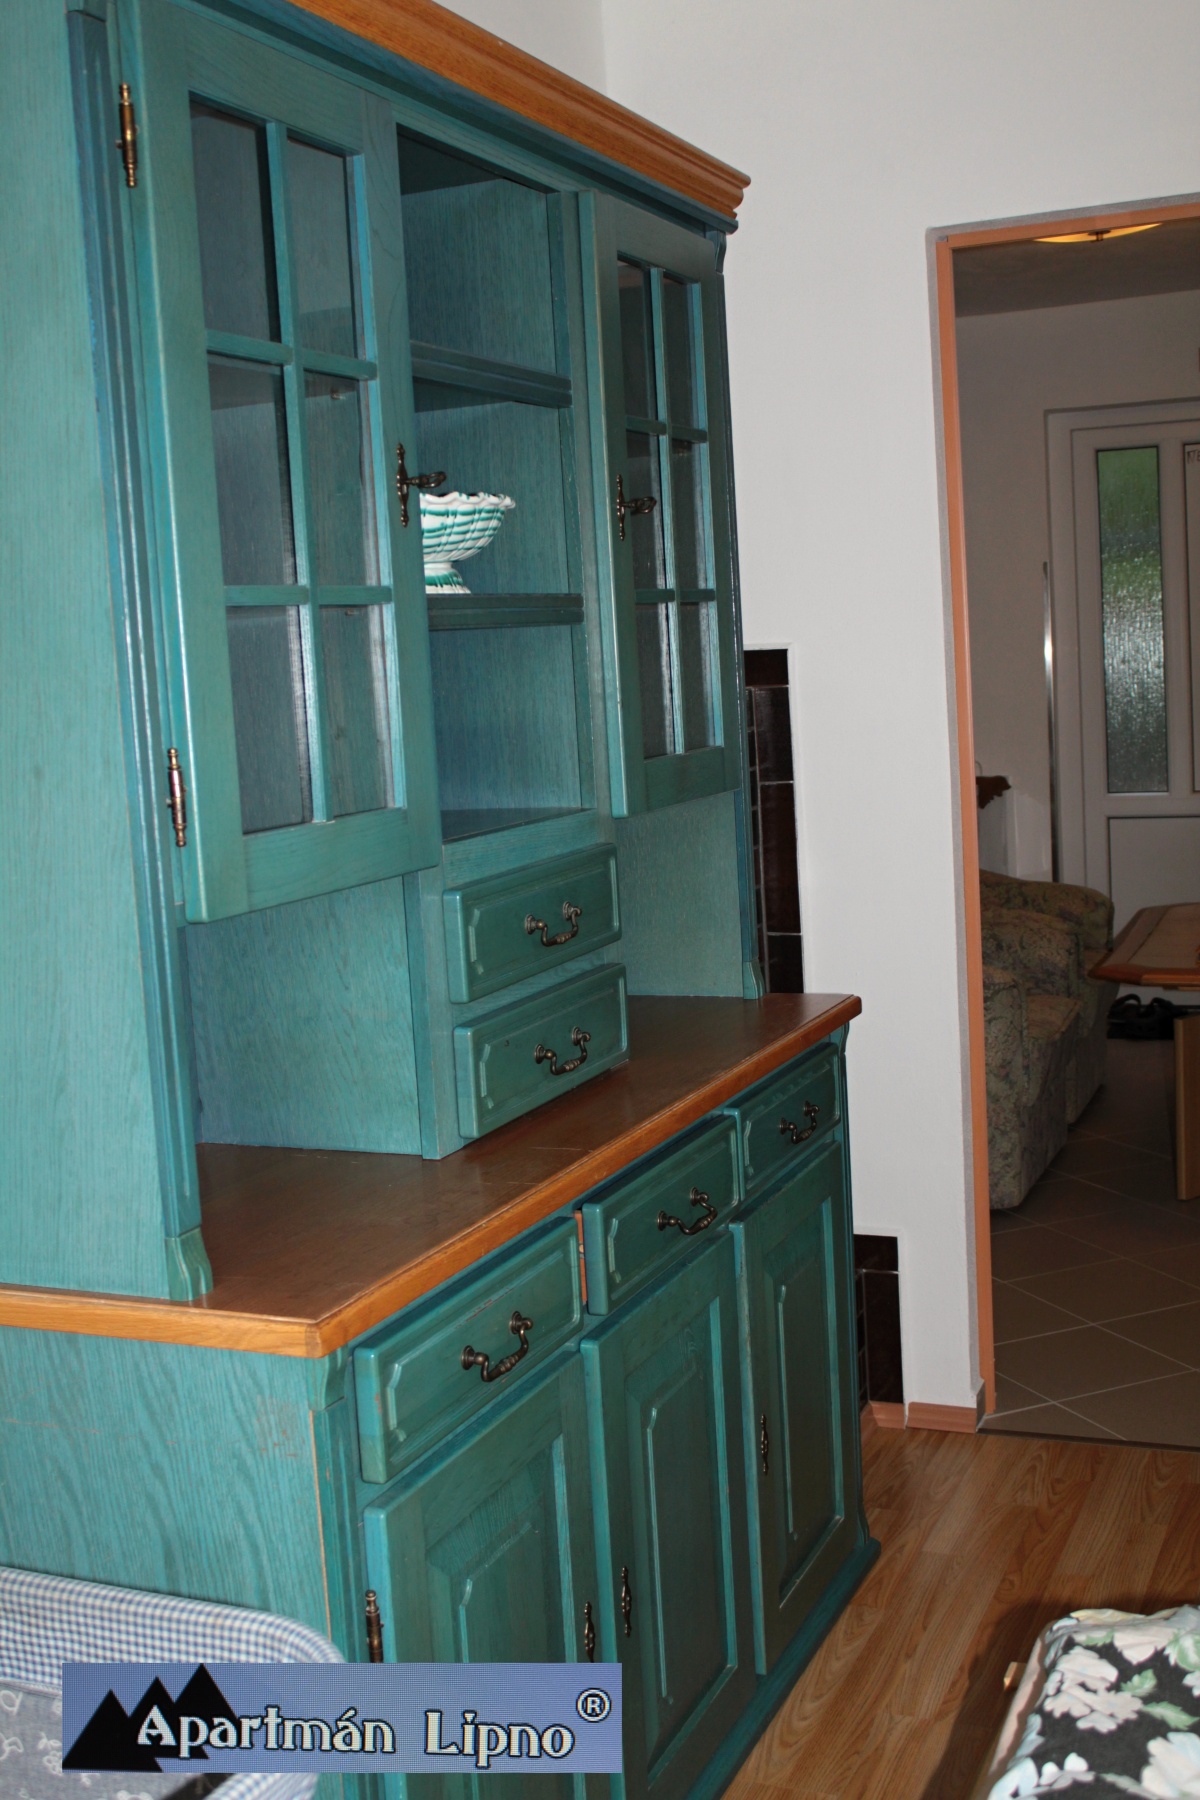 Accommodation:
Apartment Lipno 2 apartments for families u leave groups up to 14 persons.